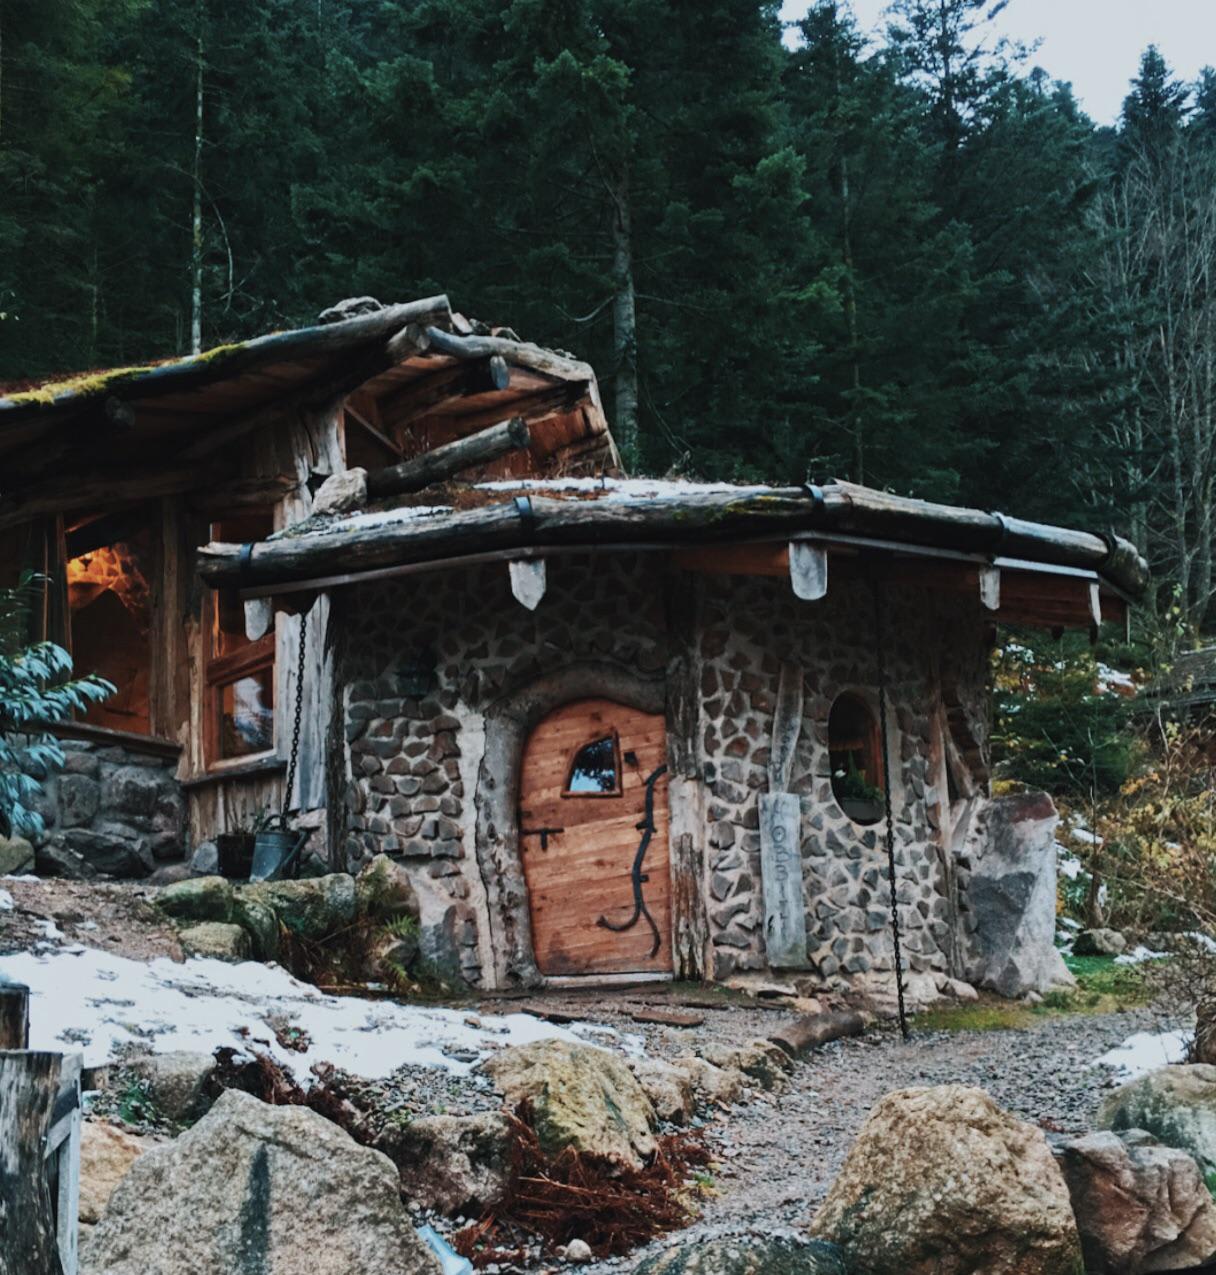 This tiny house in Vosges, France